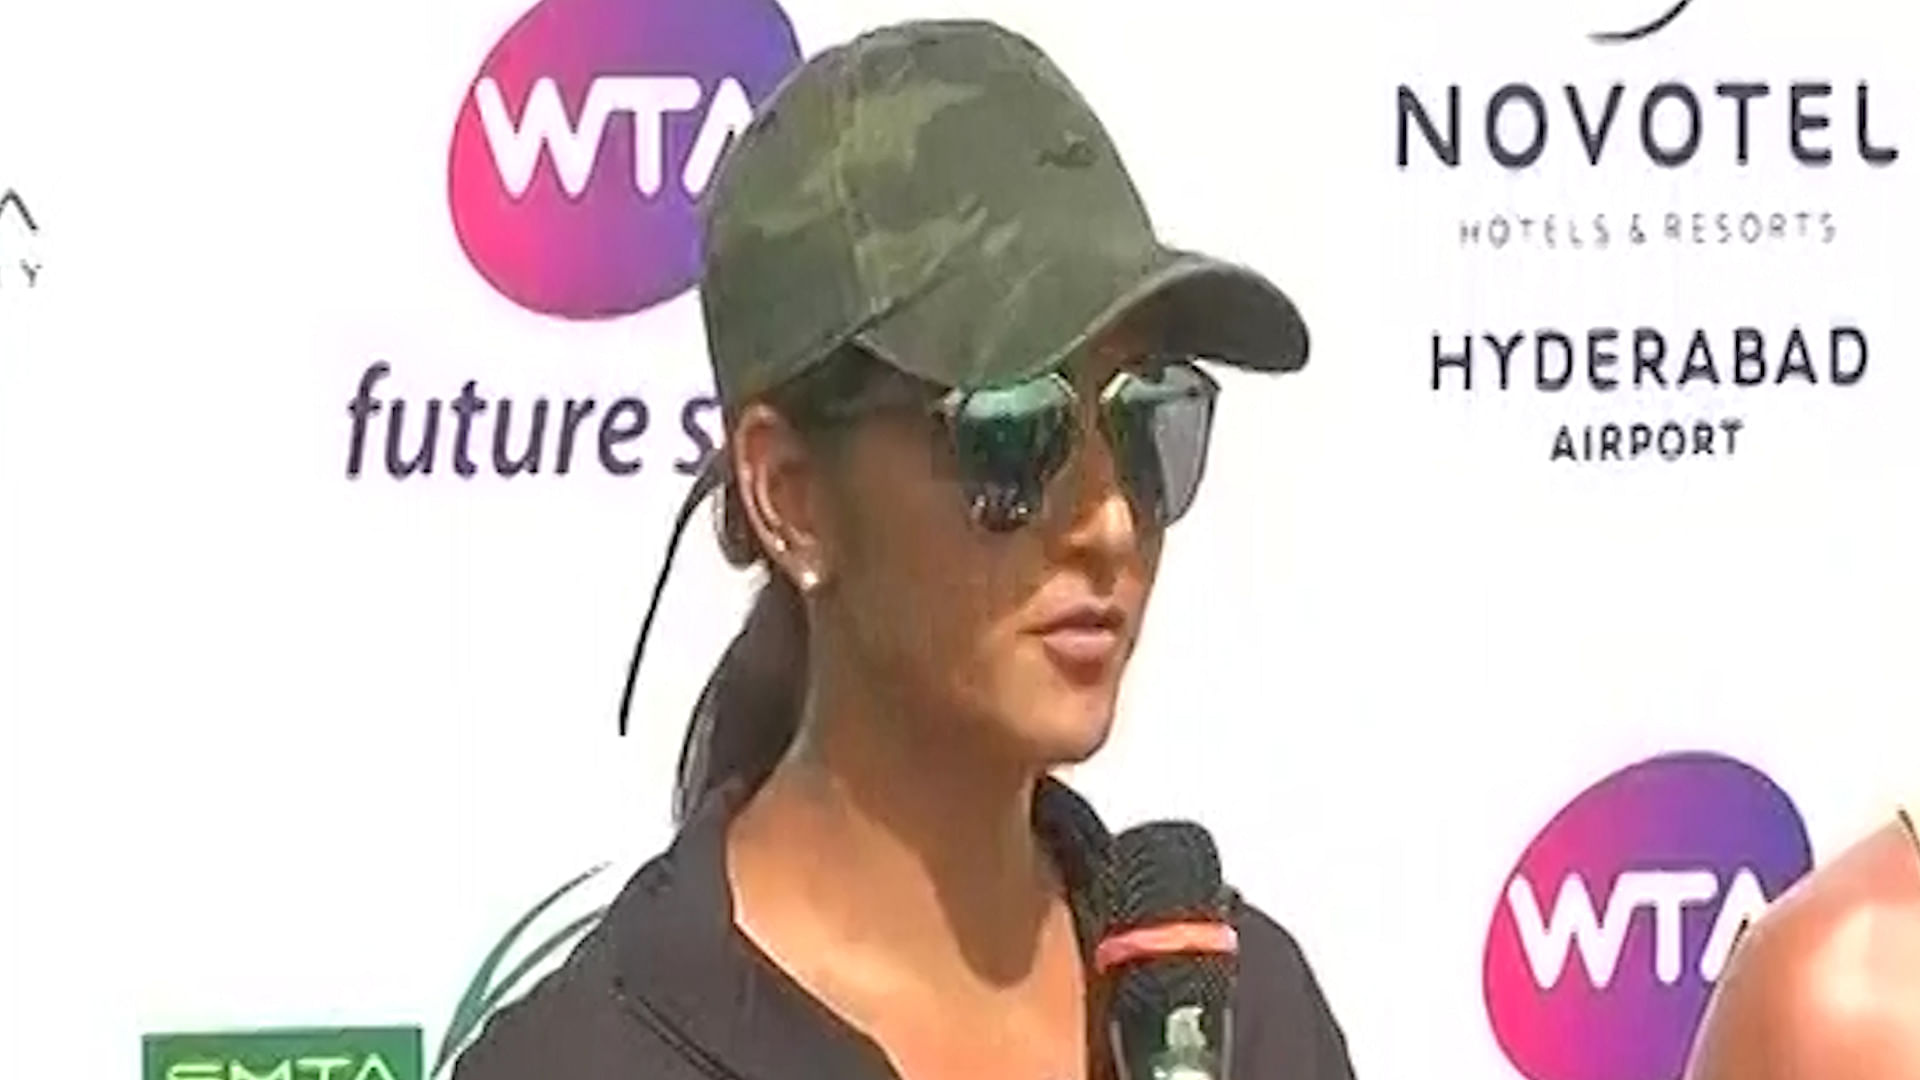 Sania Mirza speaks to the media about women’s sports in India.